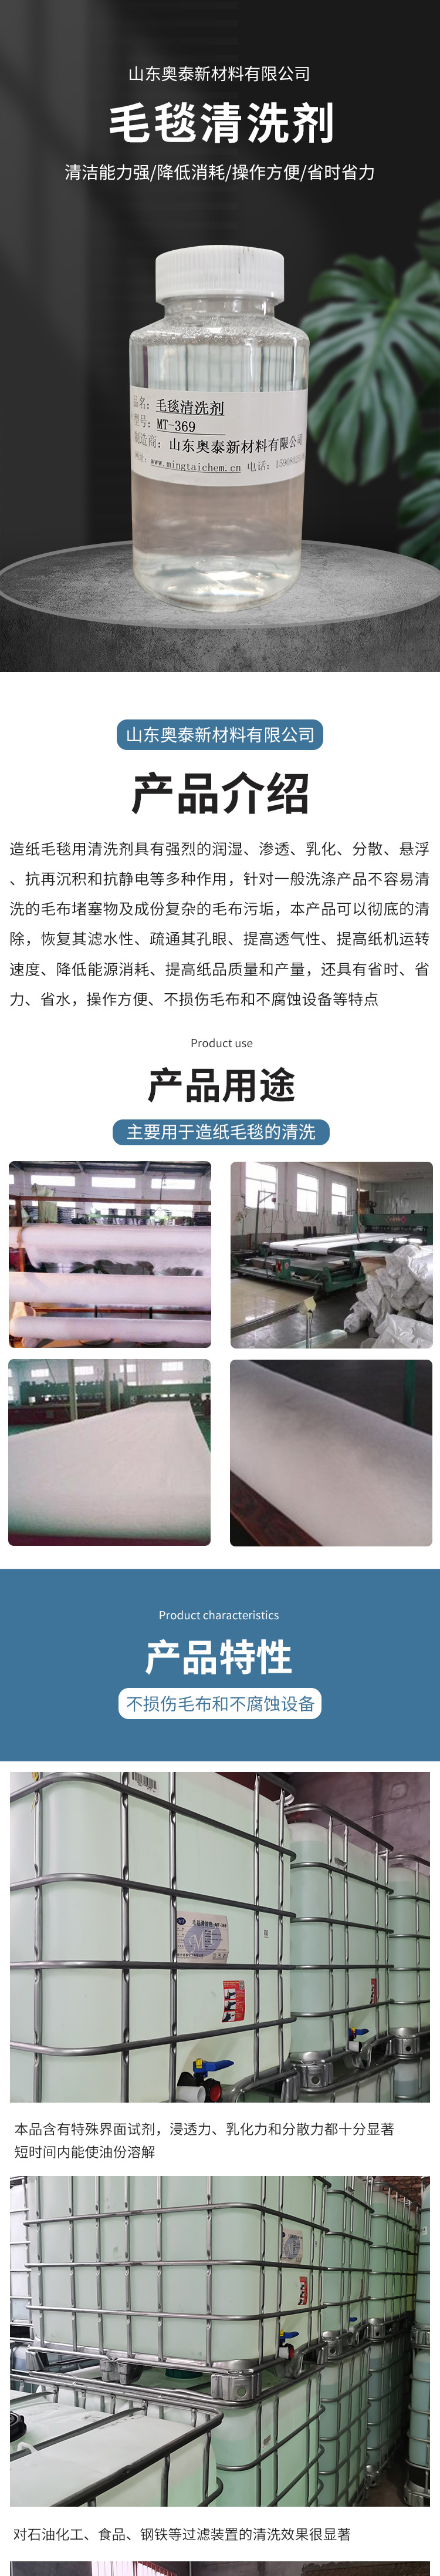 Aotai Paper Wool Fabric Detergent for Oil Removal and Organic Matter Restoration of Wool Fabric Function